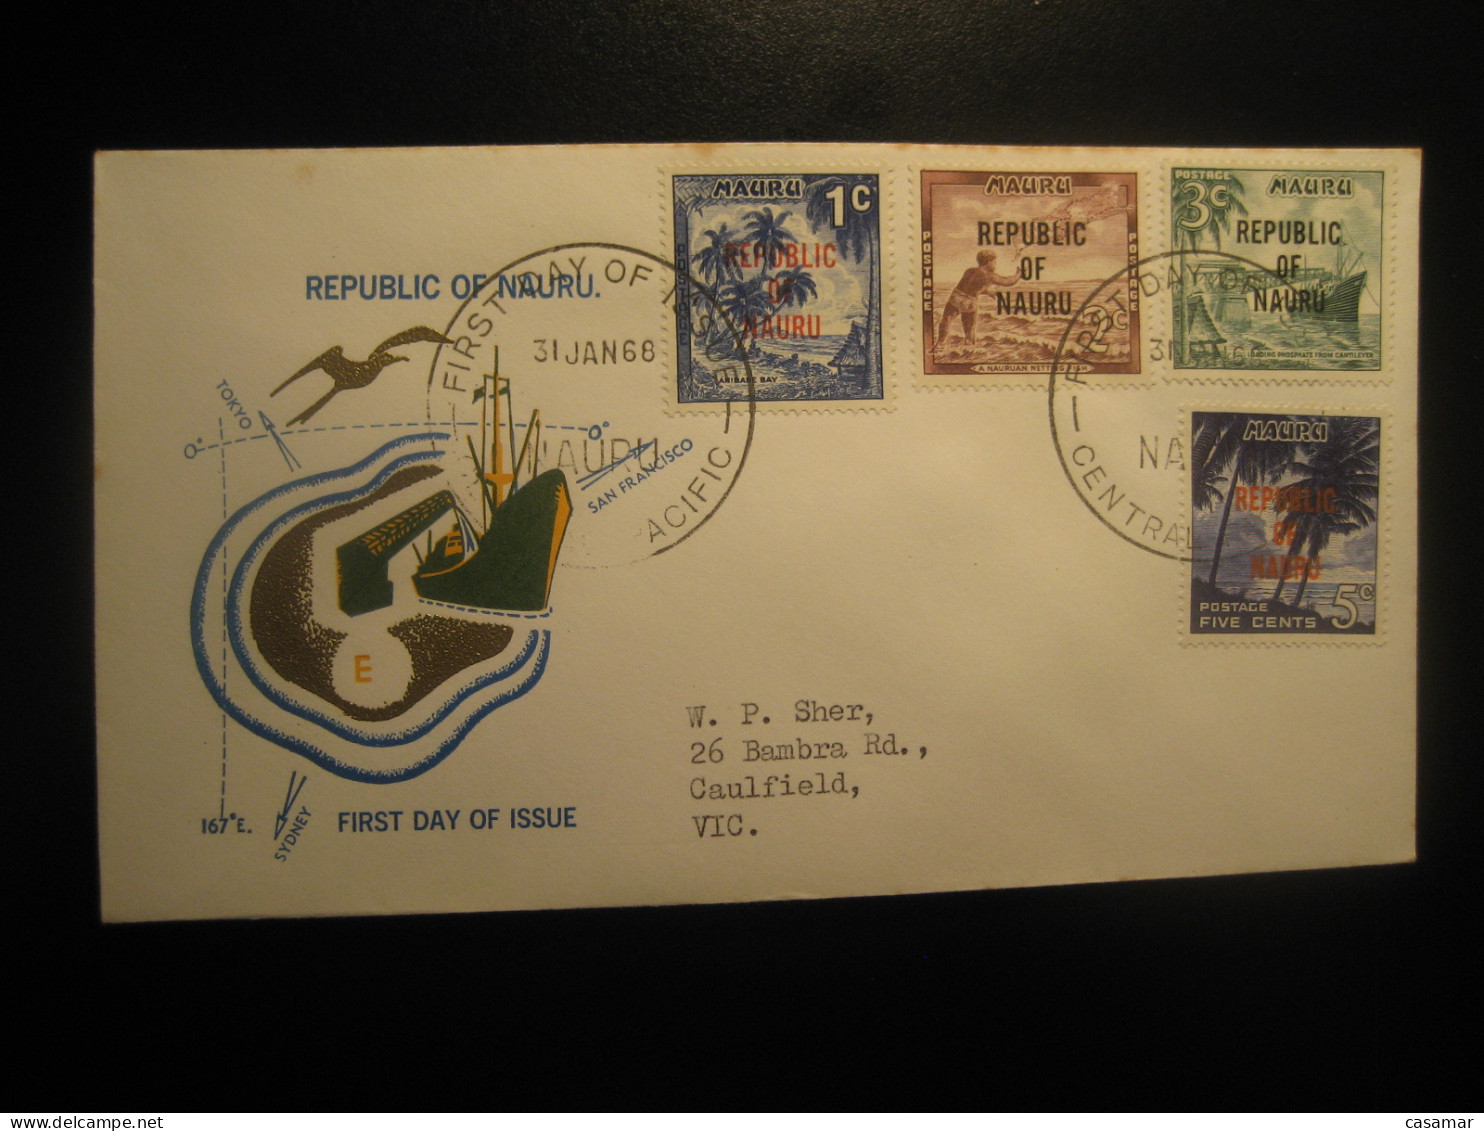 CENTRAL PACIFIC 1968 To Caulfield Australia Phosphate Geology Mineral Minerals FDC Cancel Cover NAURU - Minéraux